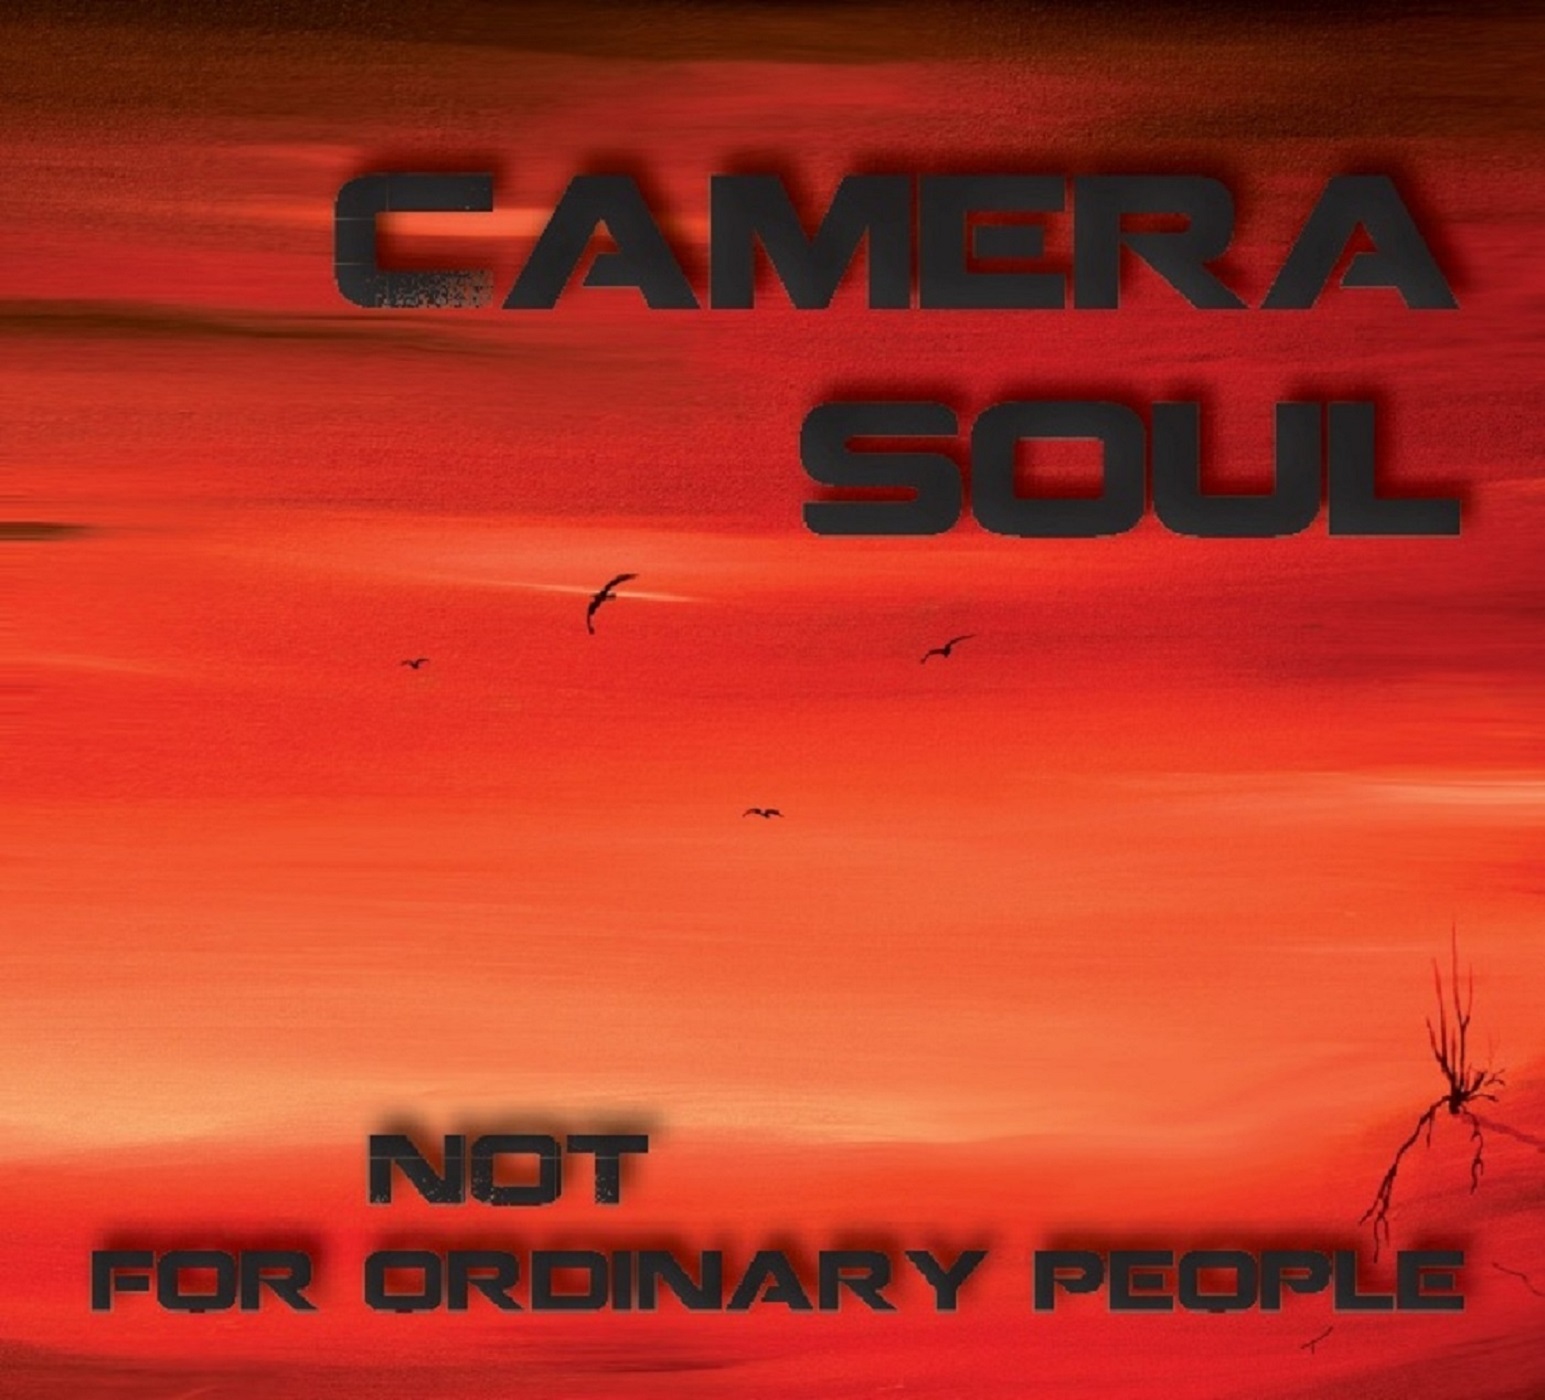 Camera Soul "Not For Ordinary People"